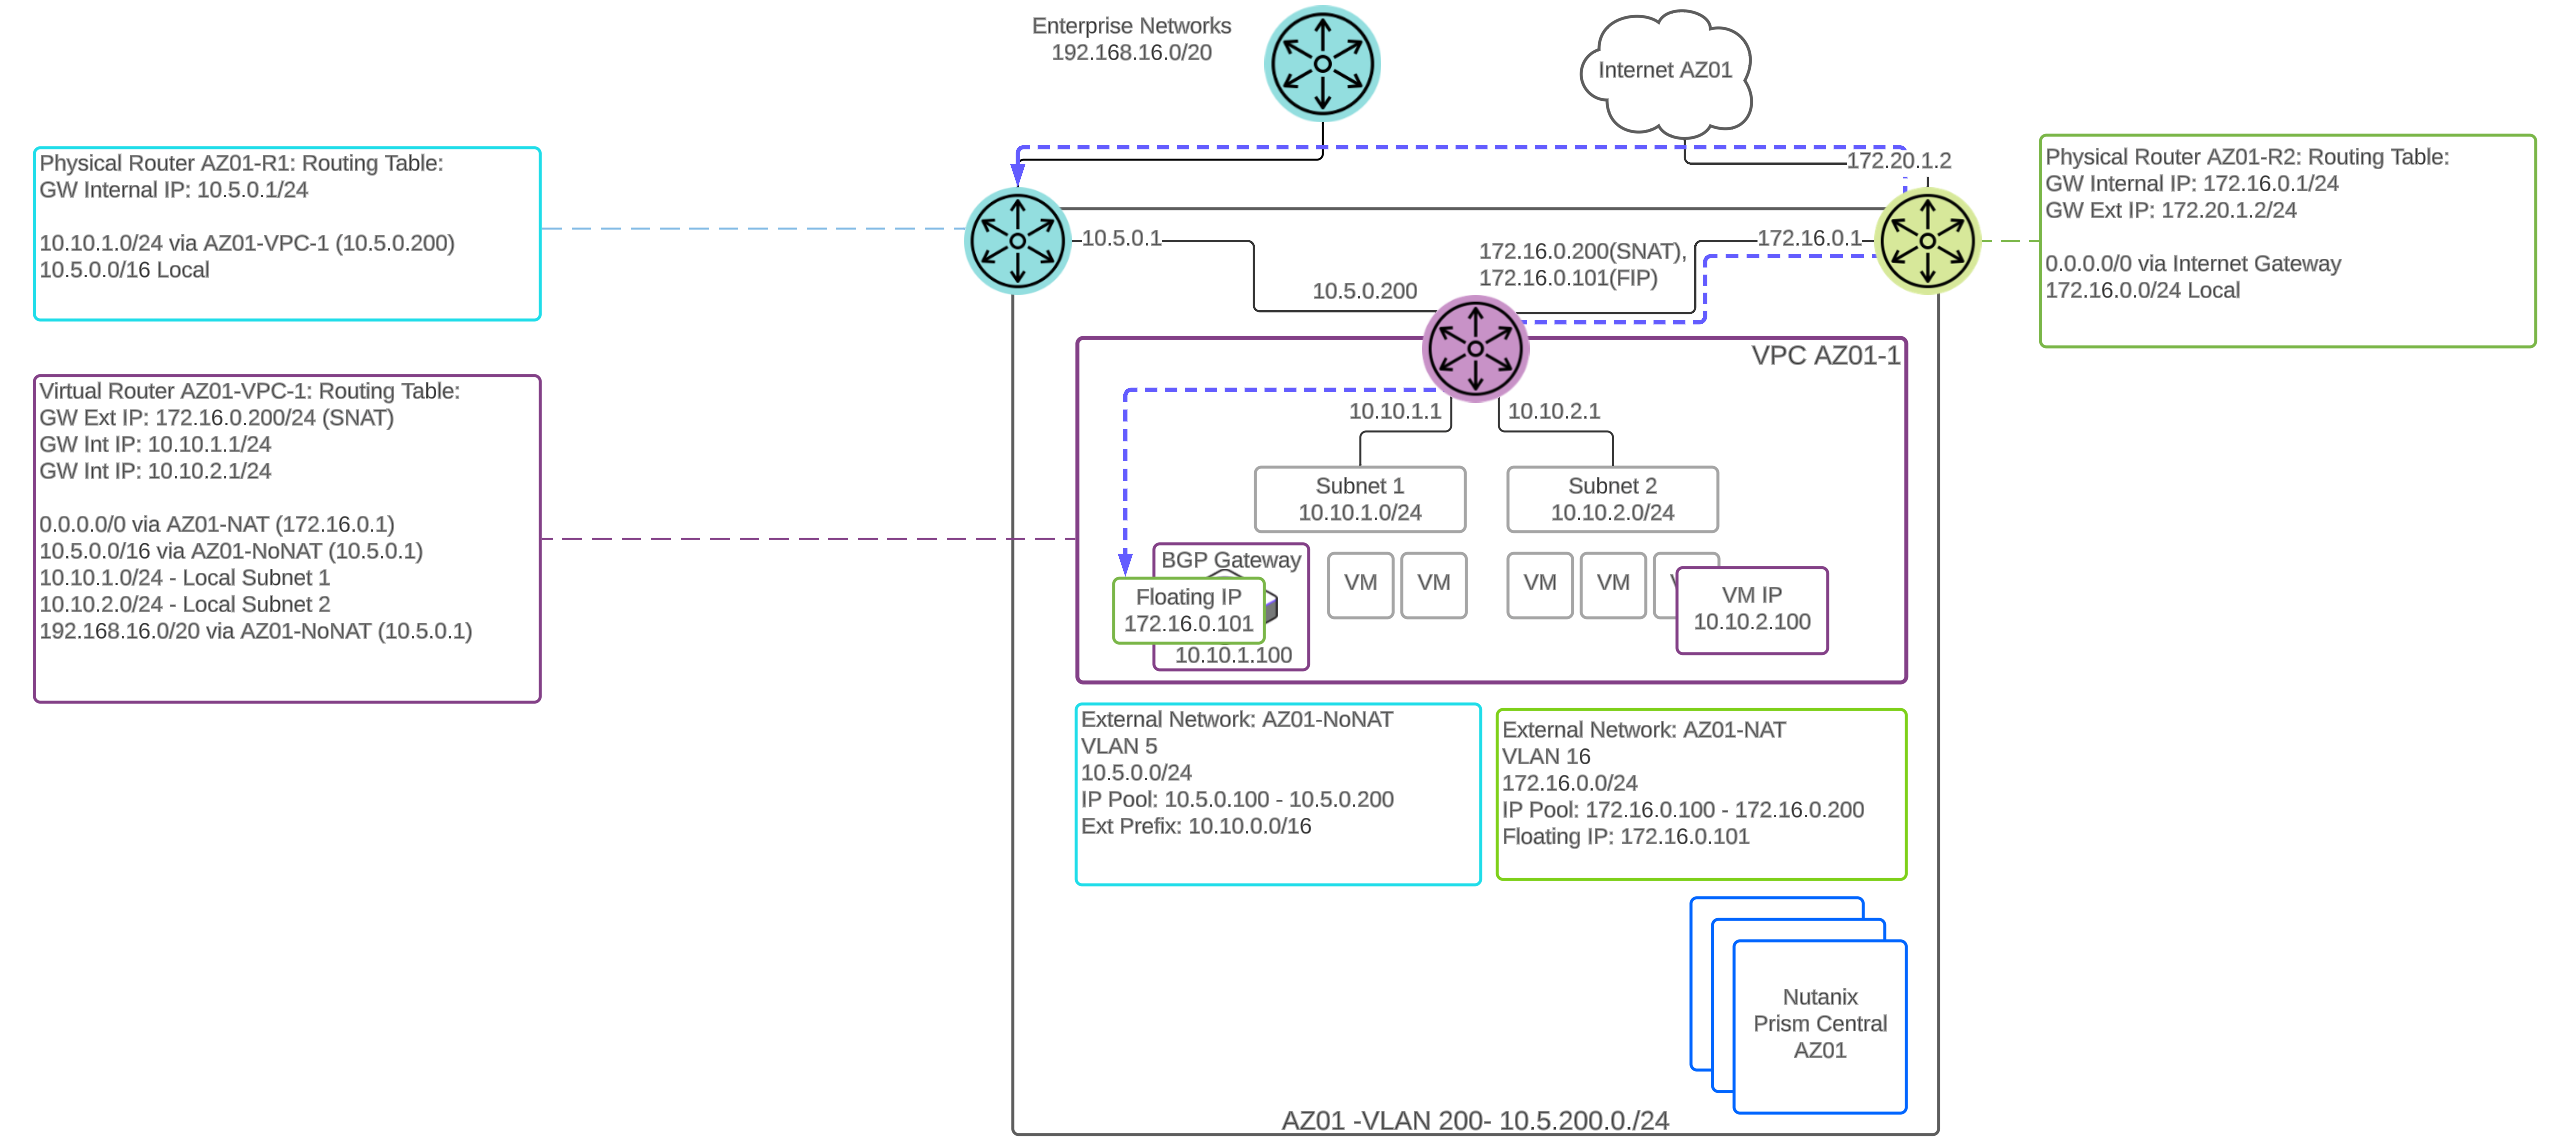 Flow Virtual Networking - Routing table BGP Gateway deployed in overlay subnet